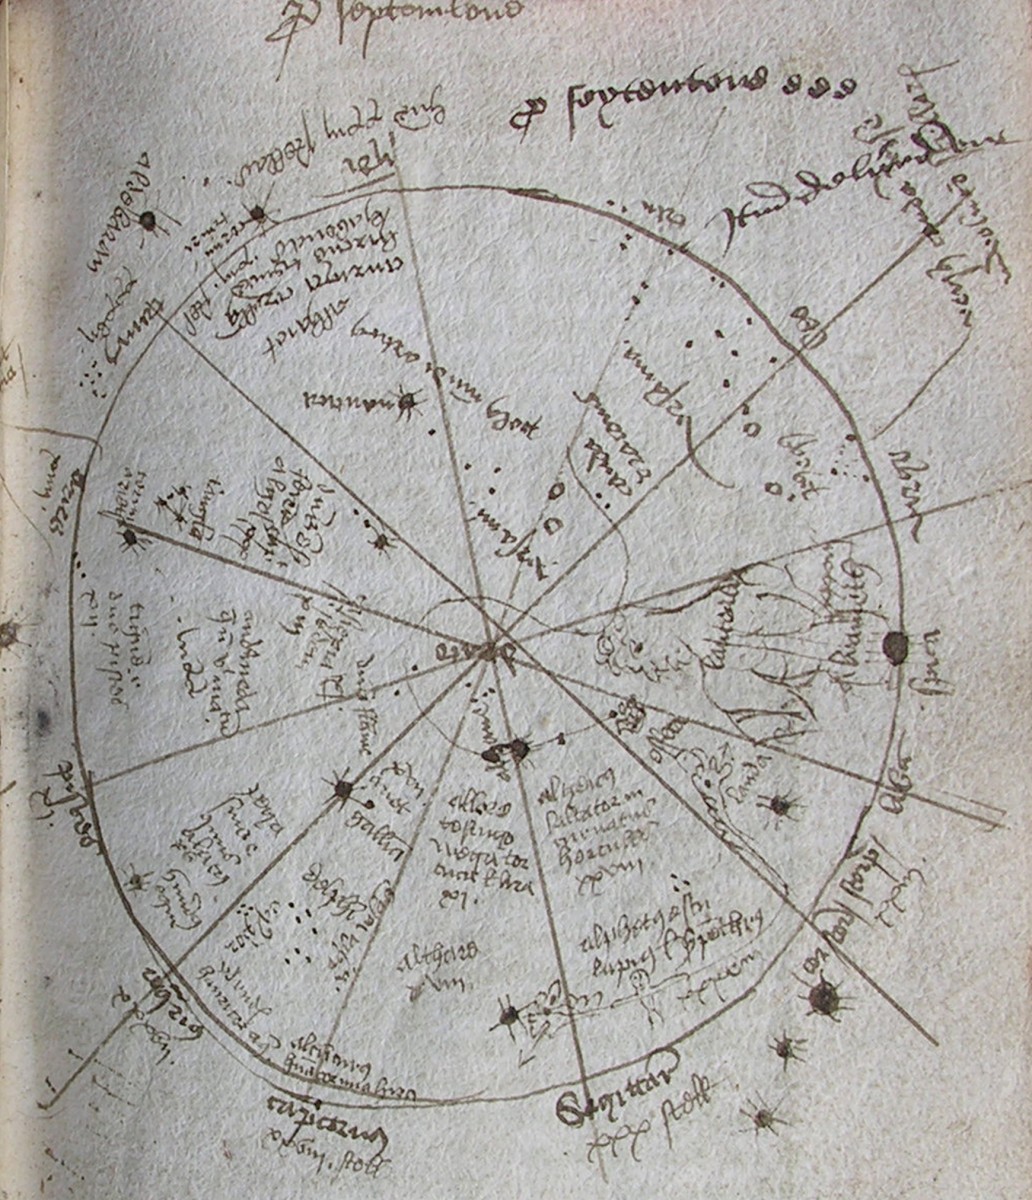 A page from Thomas Betson's notebook, MS E.6, showing a sketched diagram of the northern sky